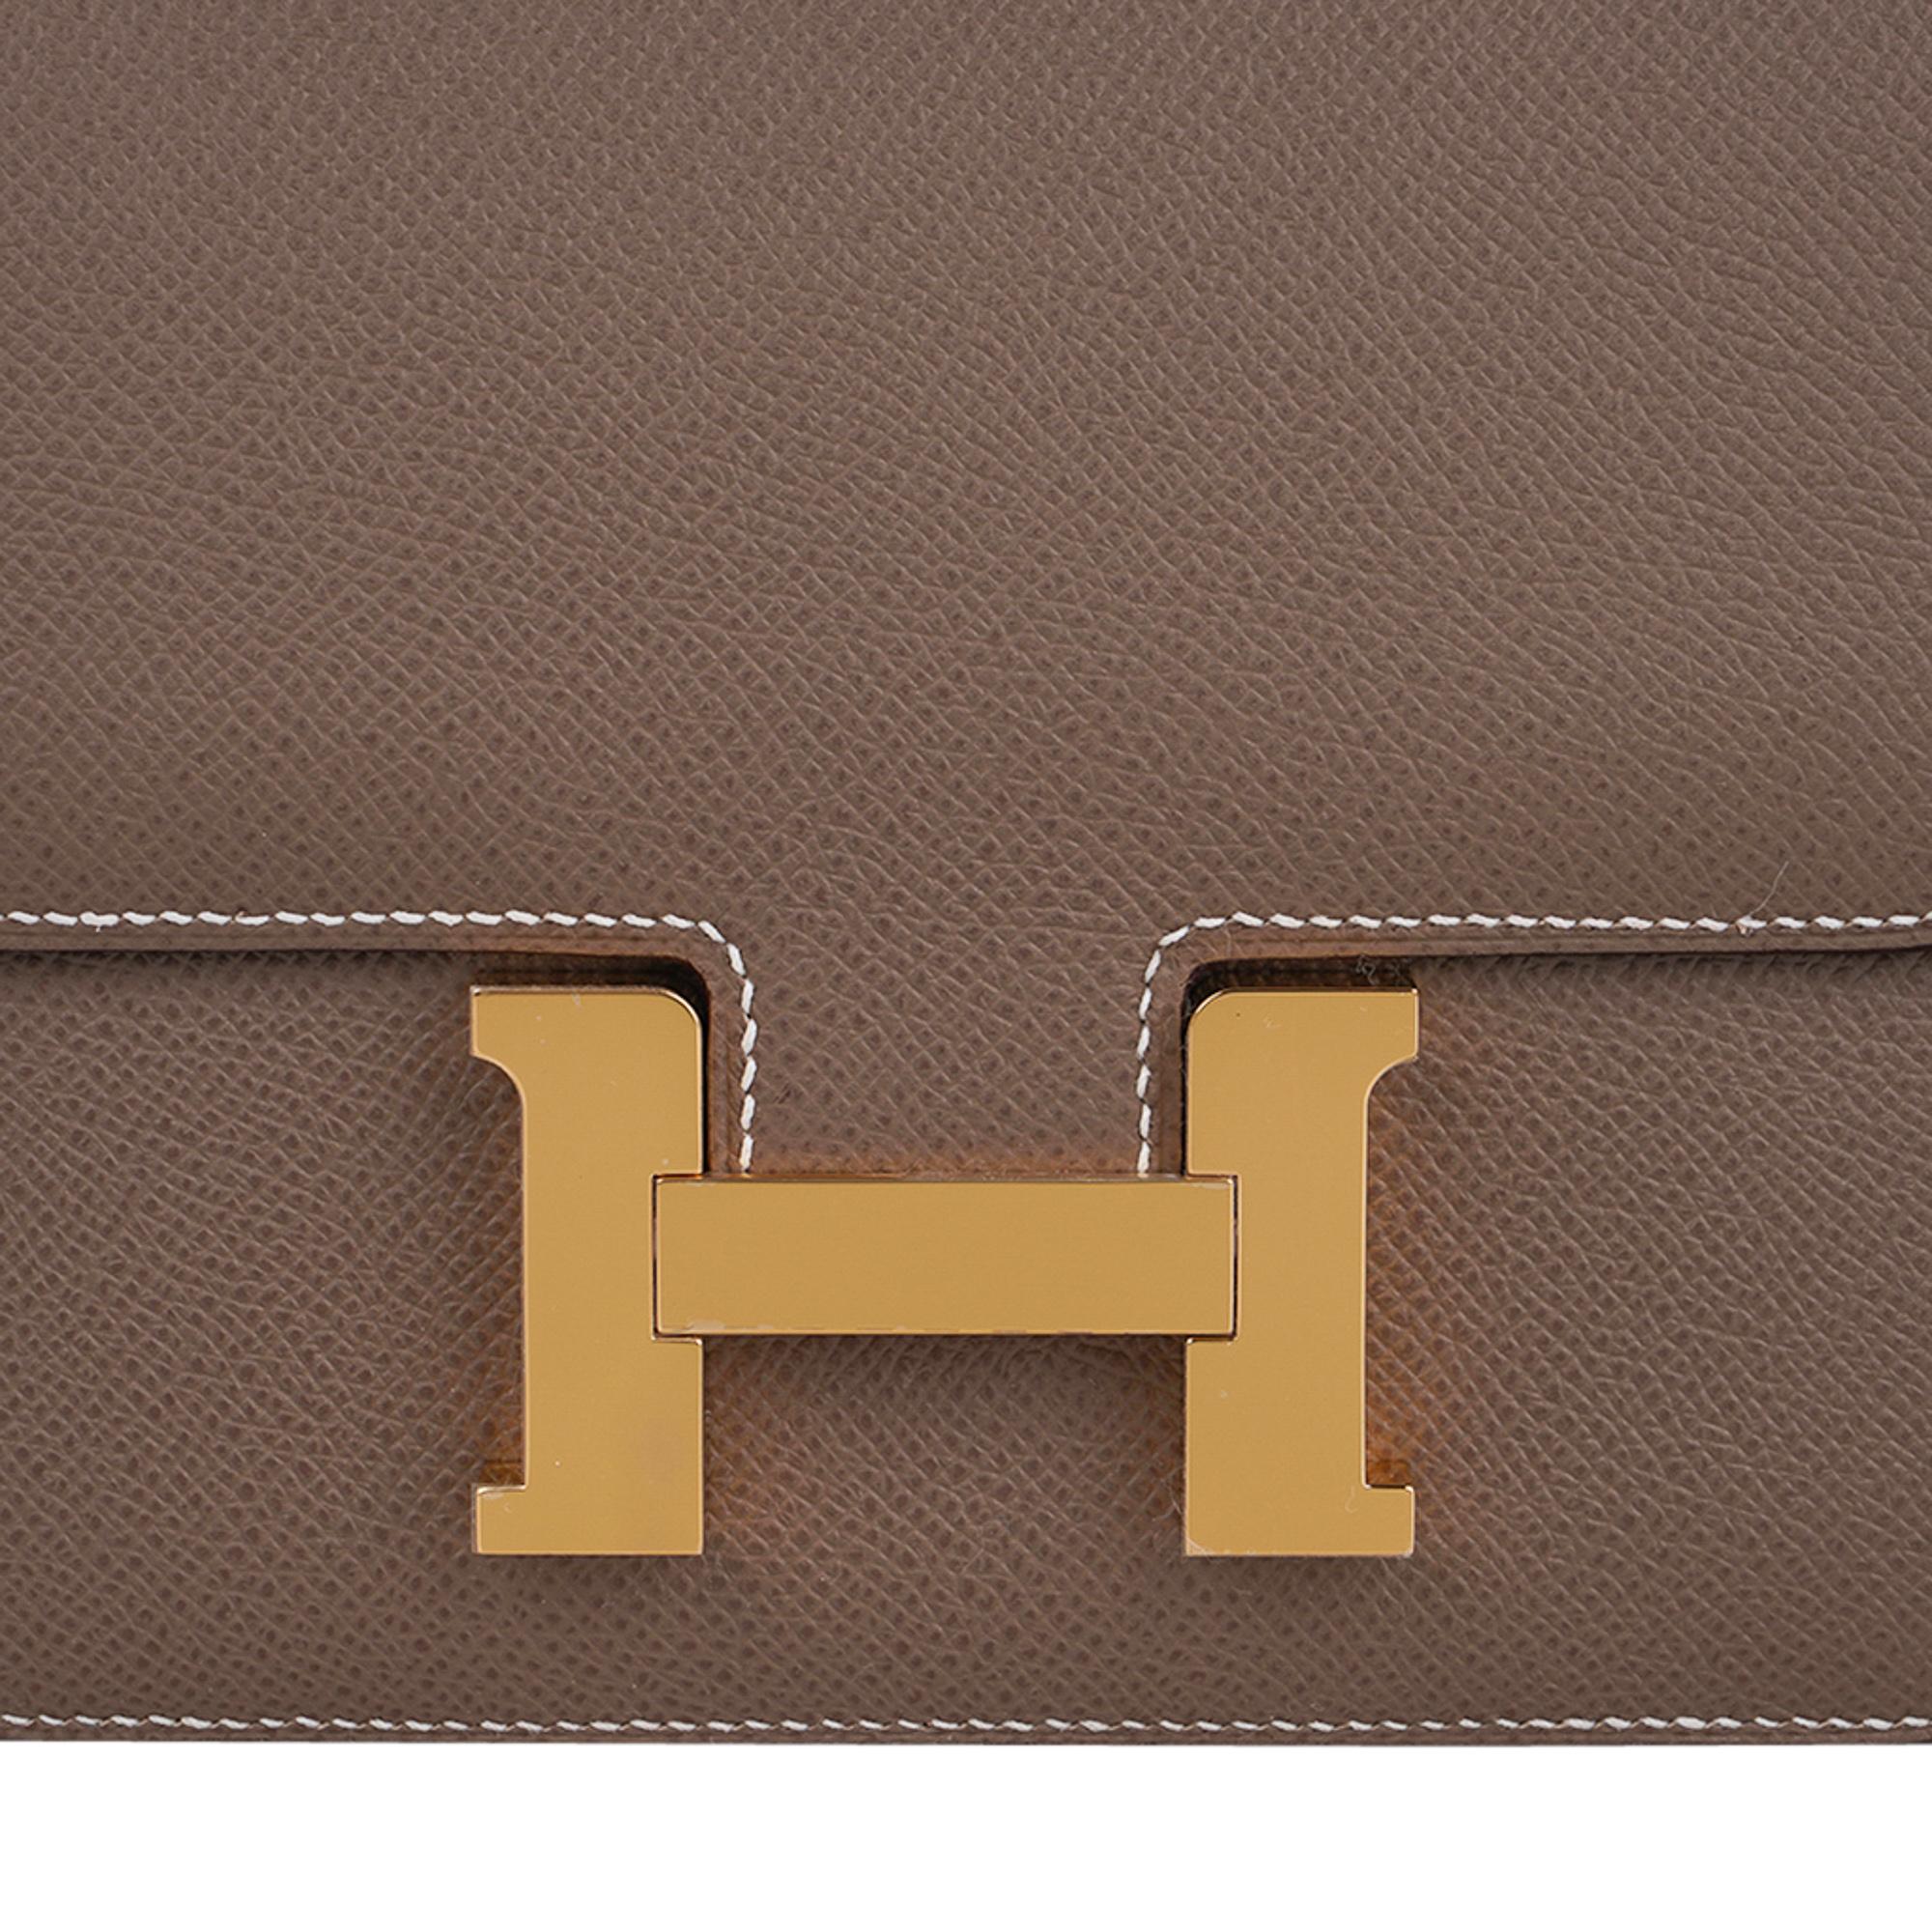 Mightychic offers a guaranteed authentic Hermes Constance 18 mini bag featured in neutral Etoupe.
Rich with gold hardware.
HERMES MADE IN FRANCE is stamped on front under flap.
Comes with signature Hermes box and sleeper.
NEW or NEVER WORN.
The